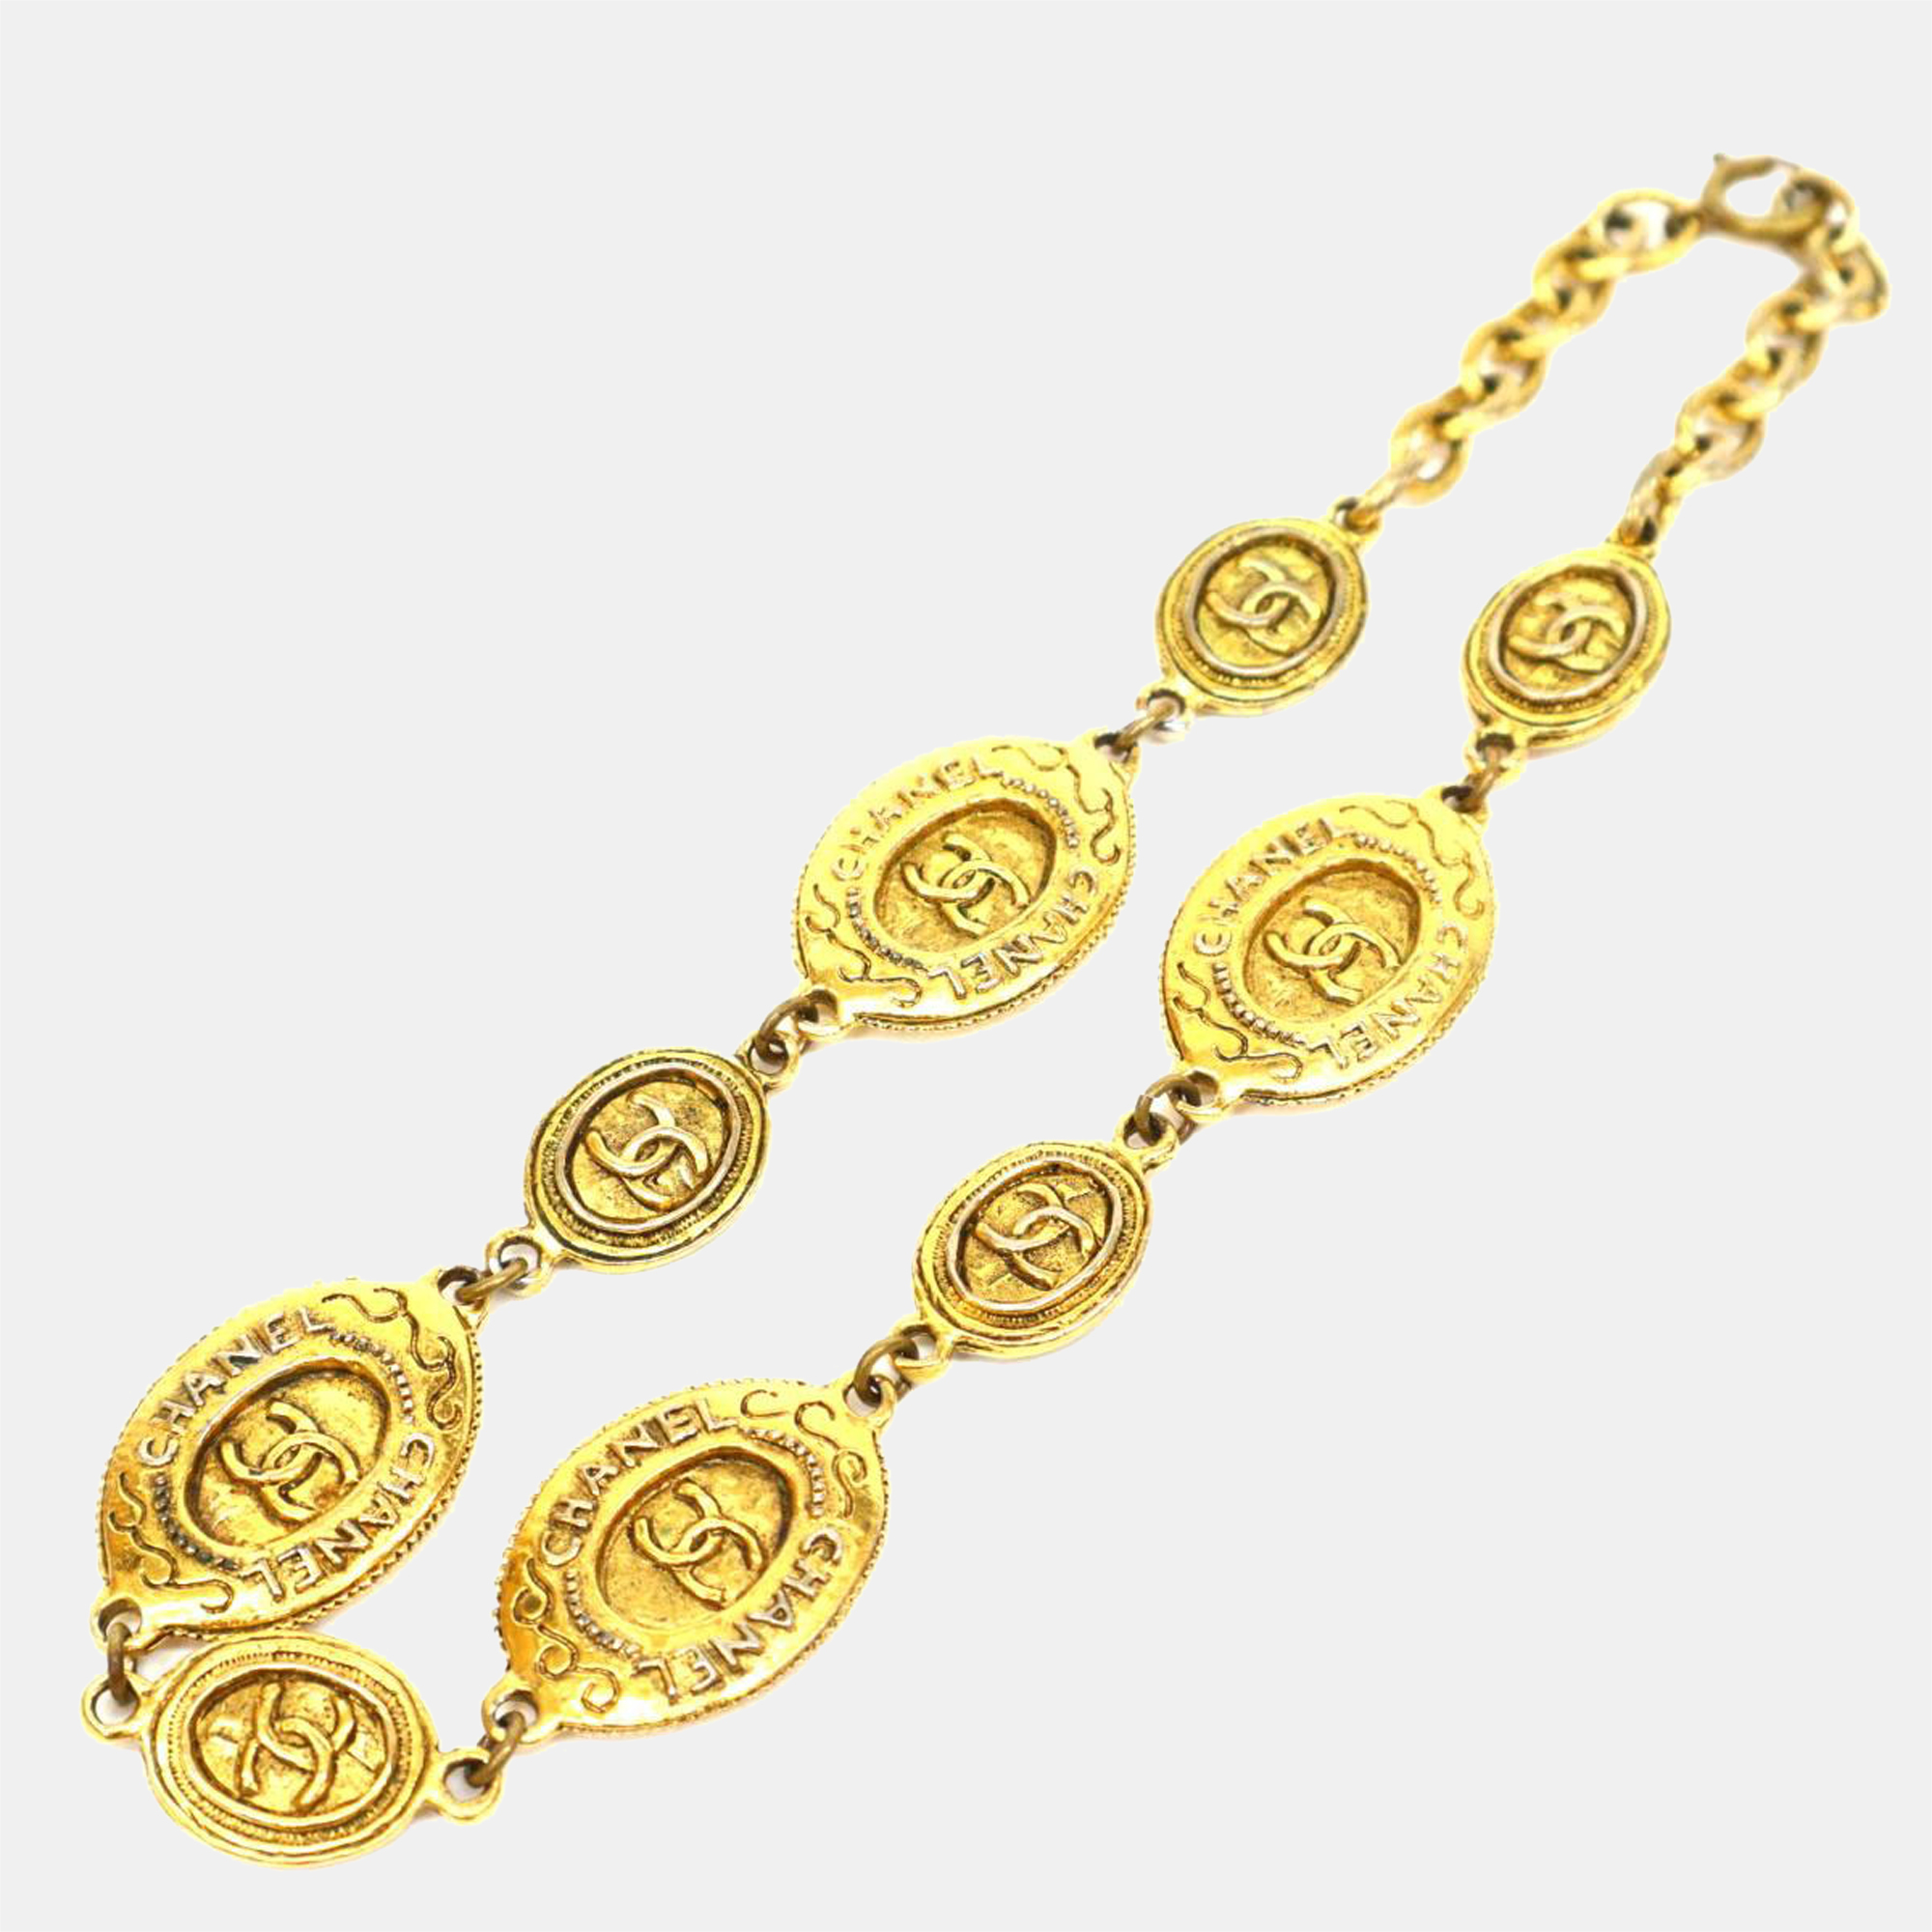 Chanel Gold Metal CC Multi-medallion Chain Necklace